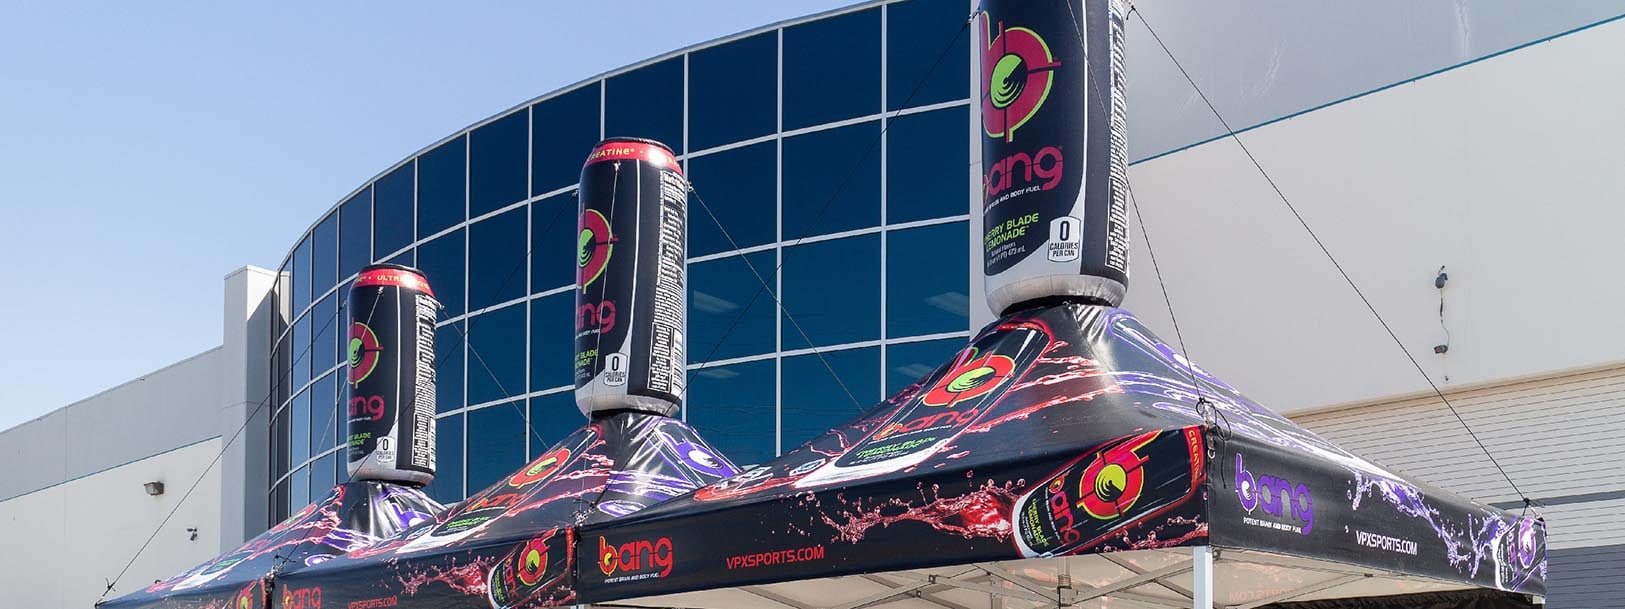 Bang-energy-drink-canopy-with-custom-inflatable.jpg